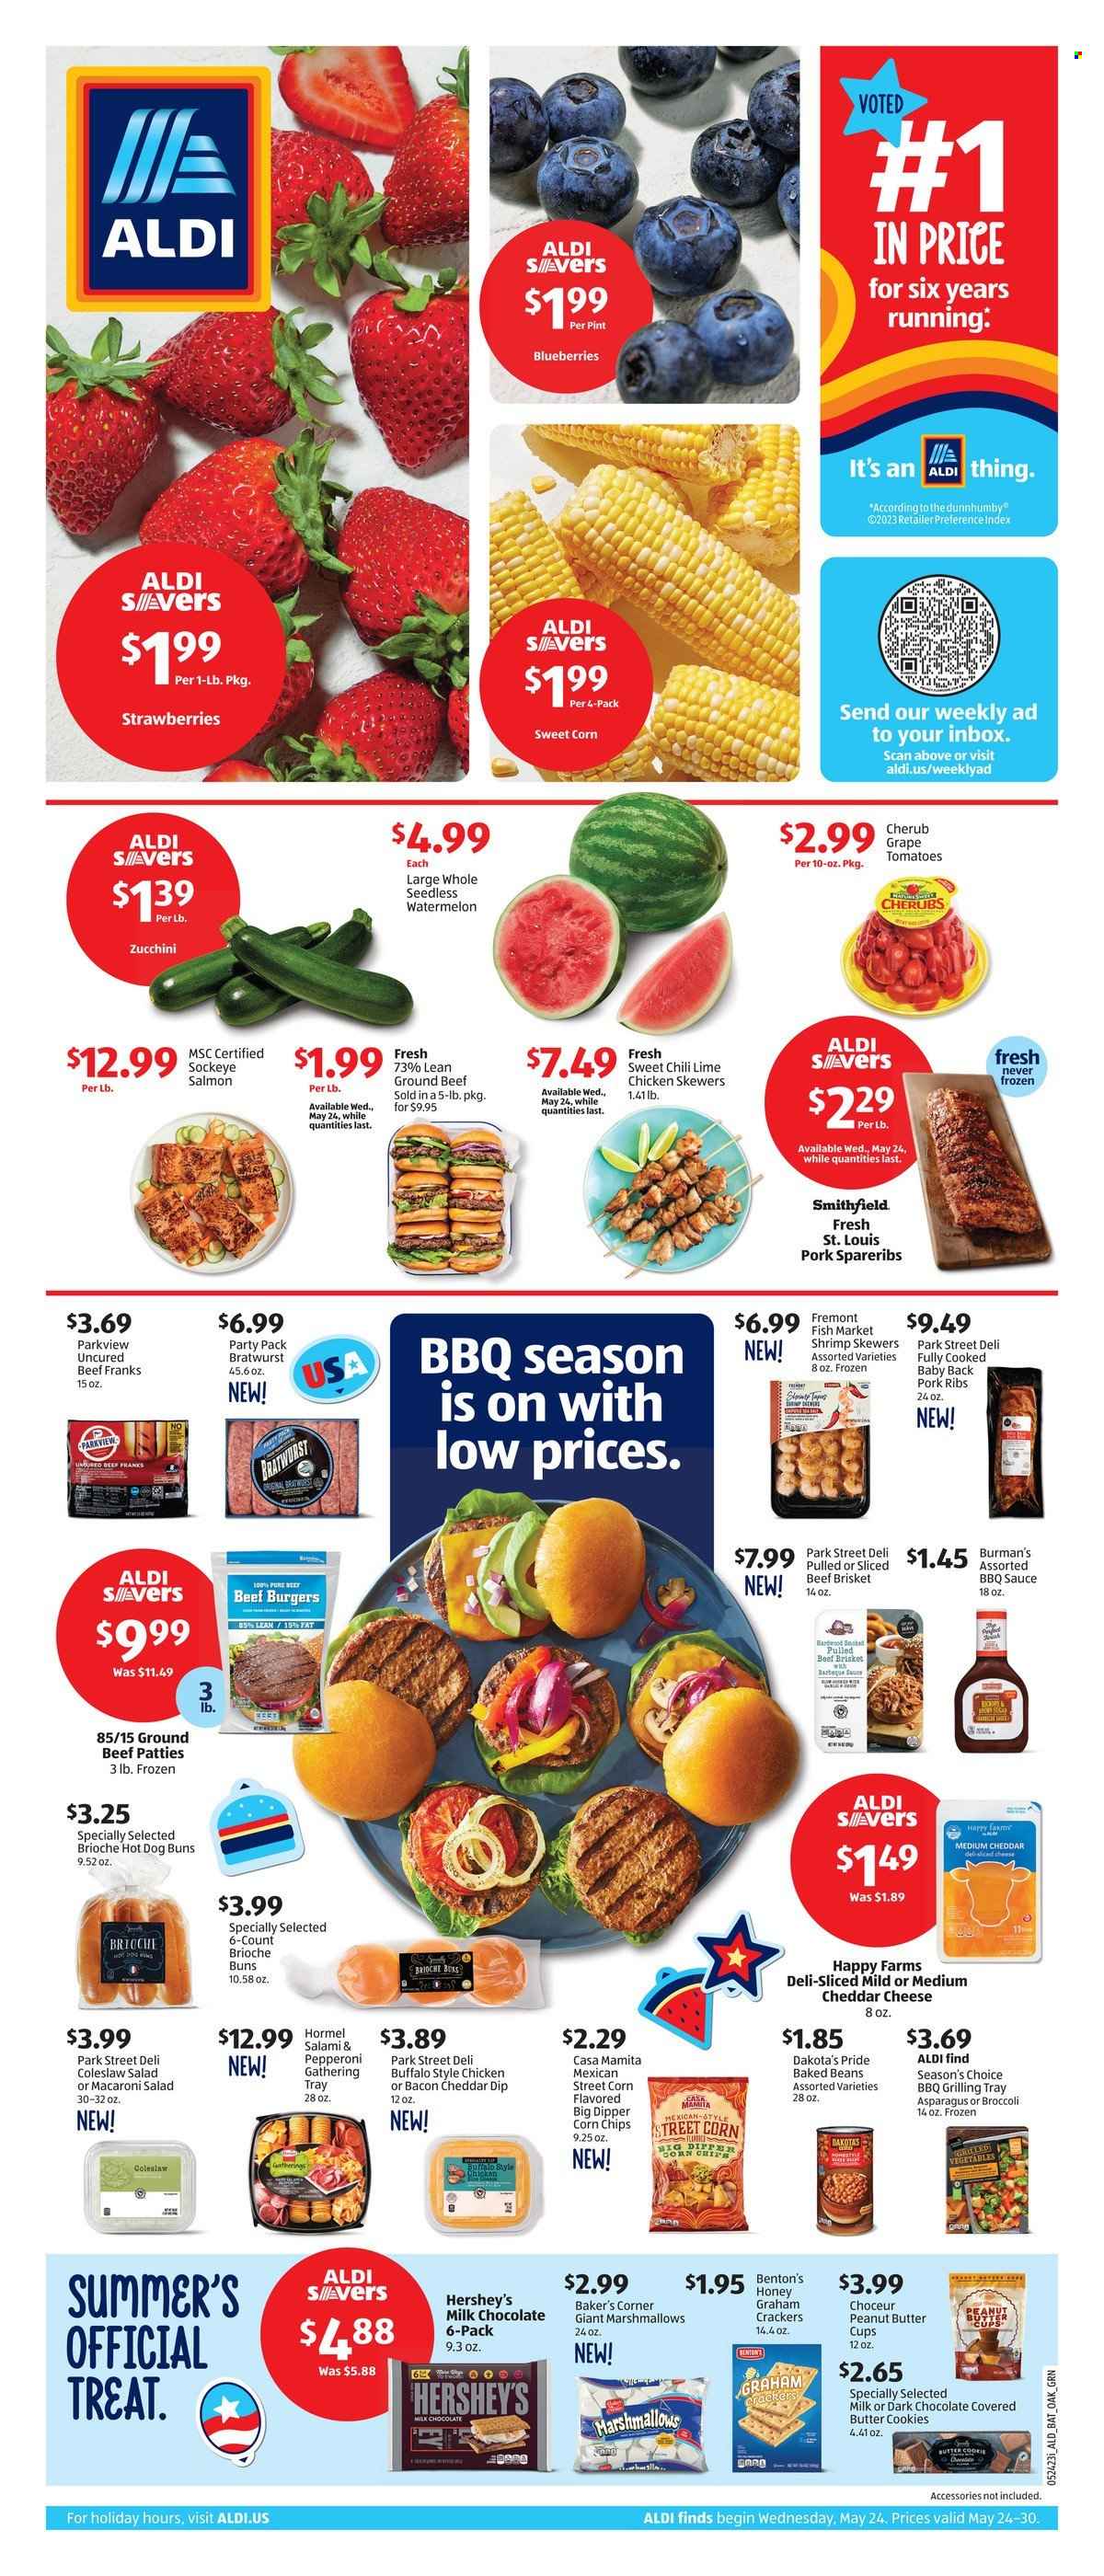 thumbnail - ALDI Flyer - 05/24/2023 - 05/30/2023 - Sales products - buns, brioche, asparagus, broccoli, tomatoes, zucchini, sweet corn, blueberries, strawberries, watermelon, salmon, shrimps, shrimp skewers, coleslaw, hamburger, sauce, beef burger, Hormel, brisket, salami, bratwurst, pepperoni, frankfurters, macaroni salad, sliced cheese, cheese, dip, Hershey's, frozen vegetables, cookies, graham crackers, marshmallows, milk chocolate, butter cookies, crackers, peanut butter cups, corn chips, cane sugar, baked beans, BBQ sauce, meat skewer, beef meat, ground beef, beef brisket, ribs, pork meat, pork ribs, pork spare ribs, pork back ribs, corn, chicken, mild cheddar, cheddar, snack, chips, beans, chocolate. Page 1.